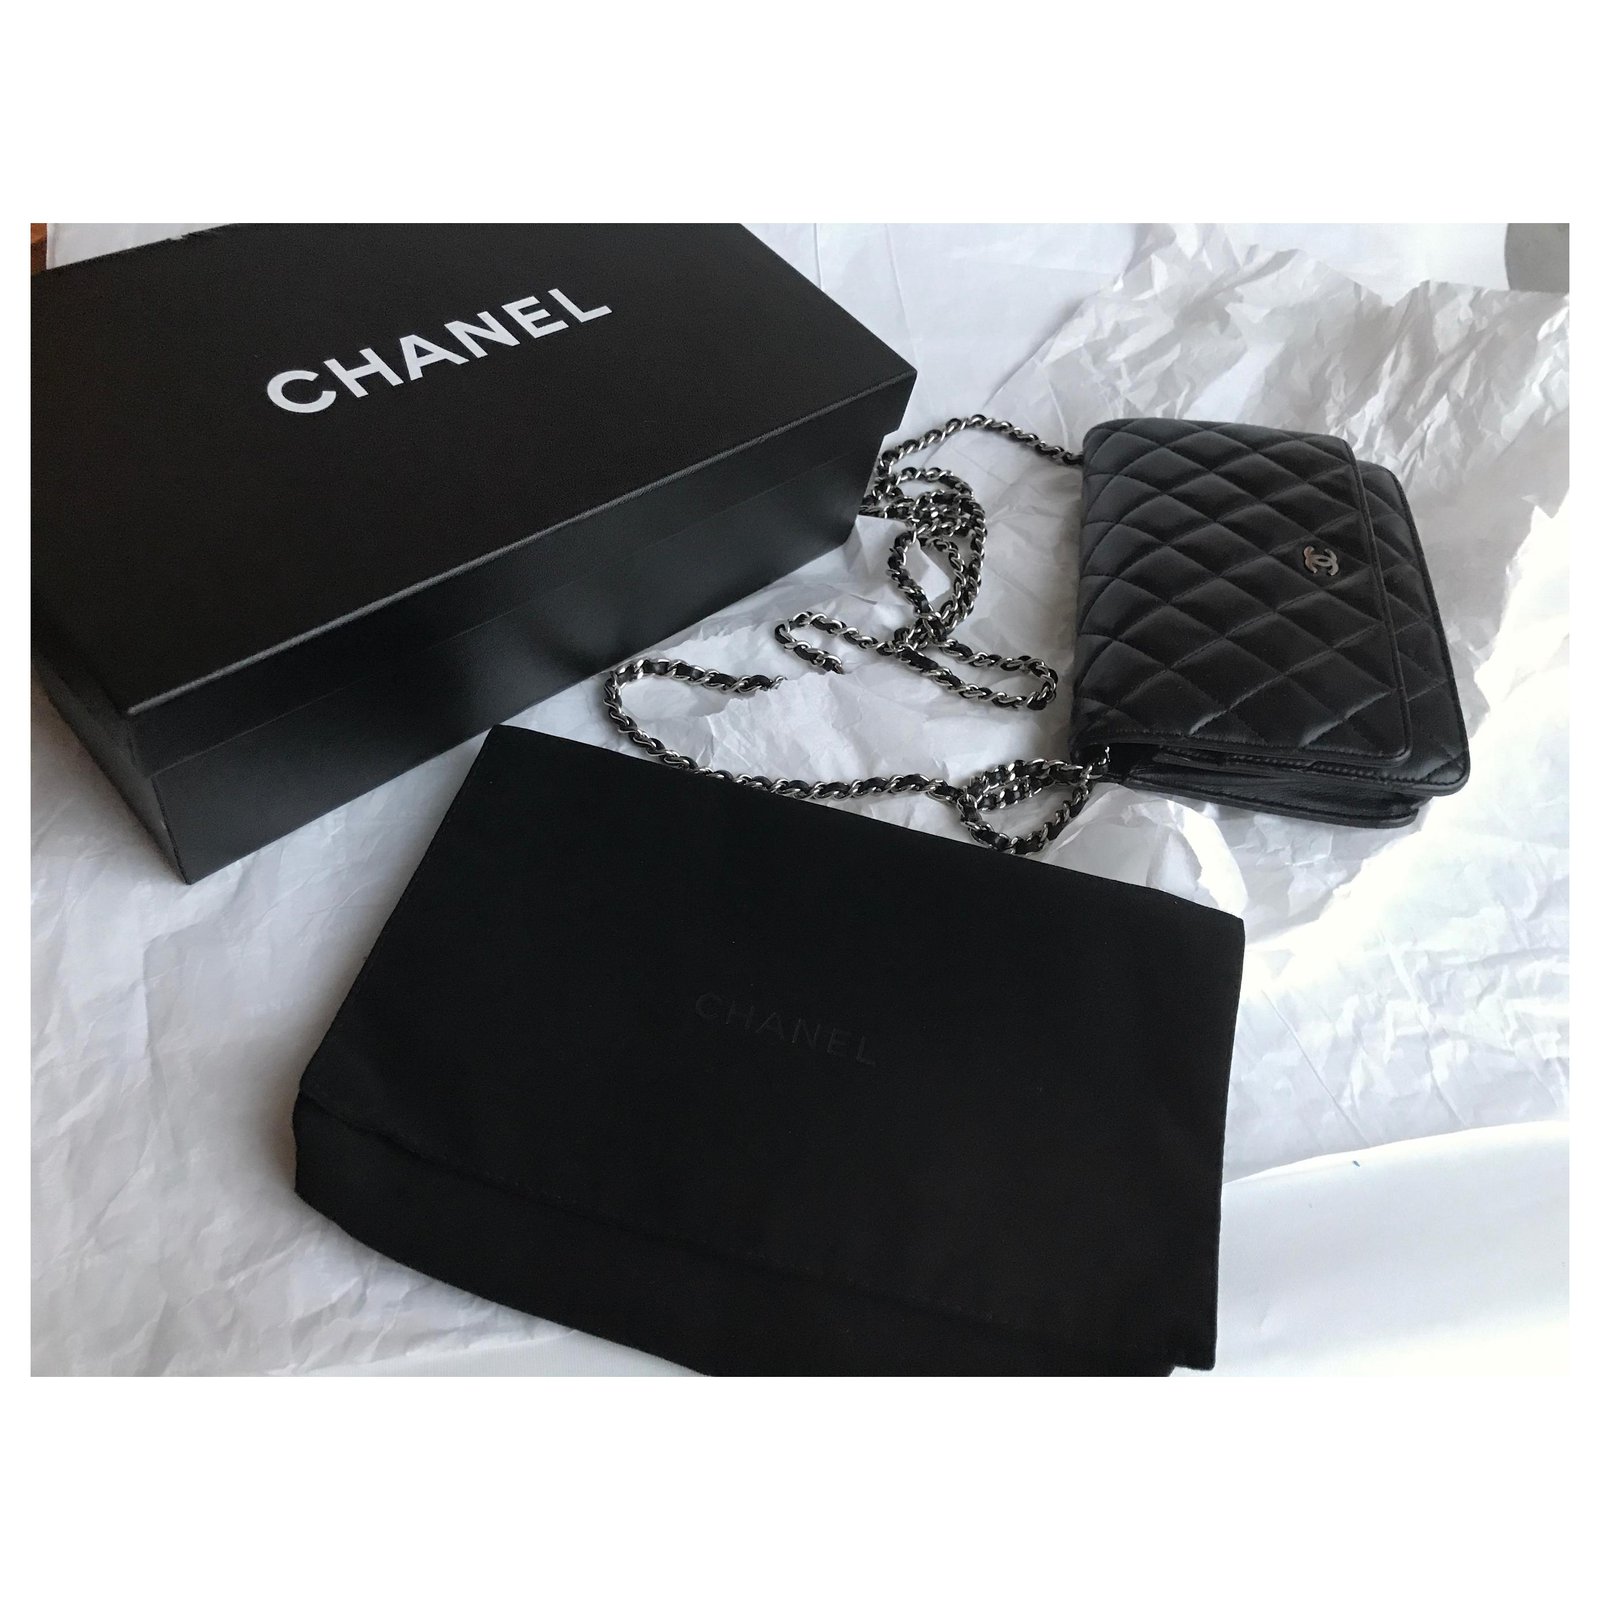 Black & SHW wallet on chain - complete with dust bag & box